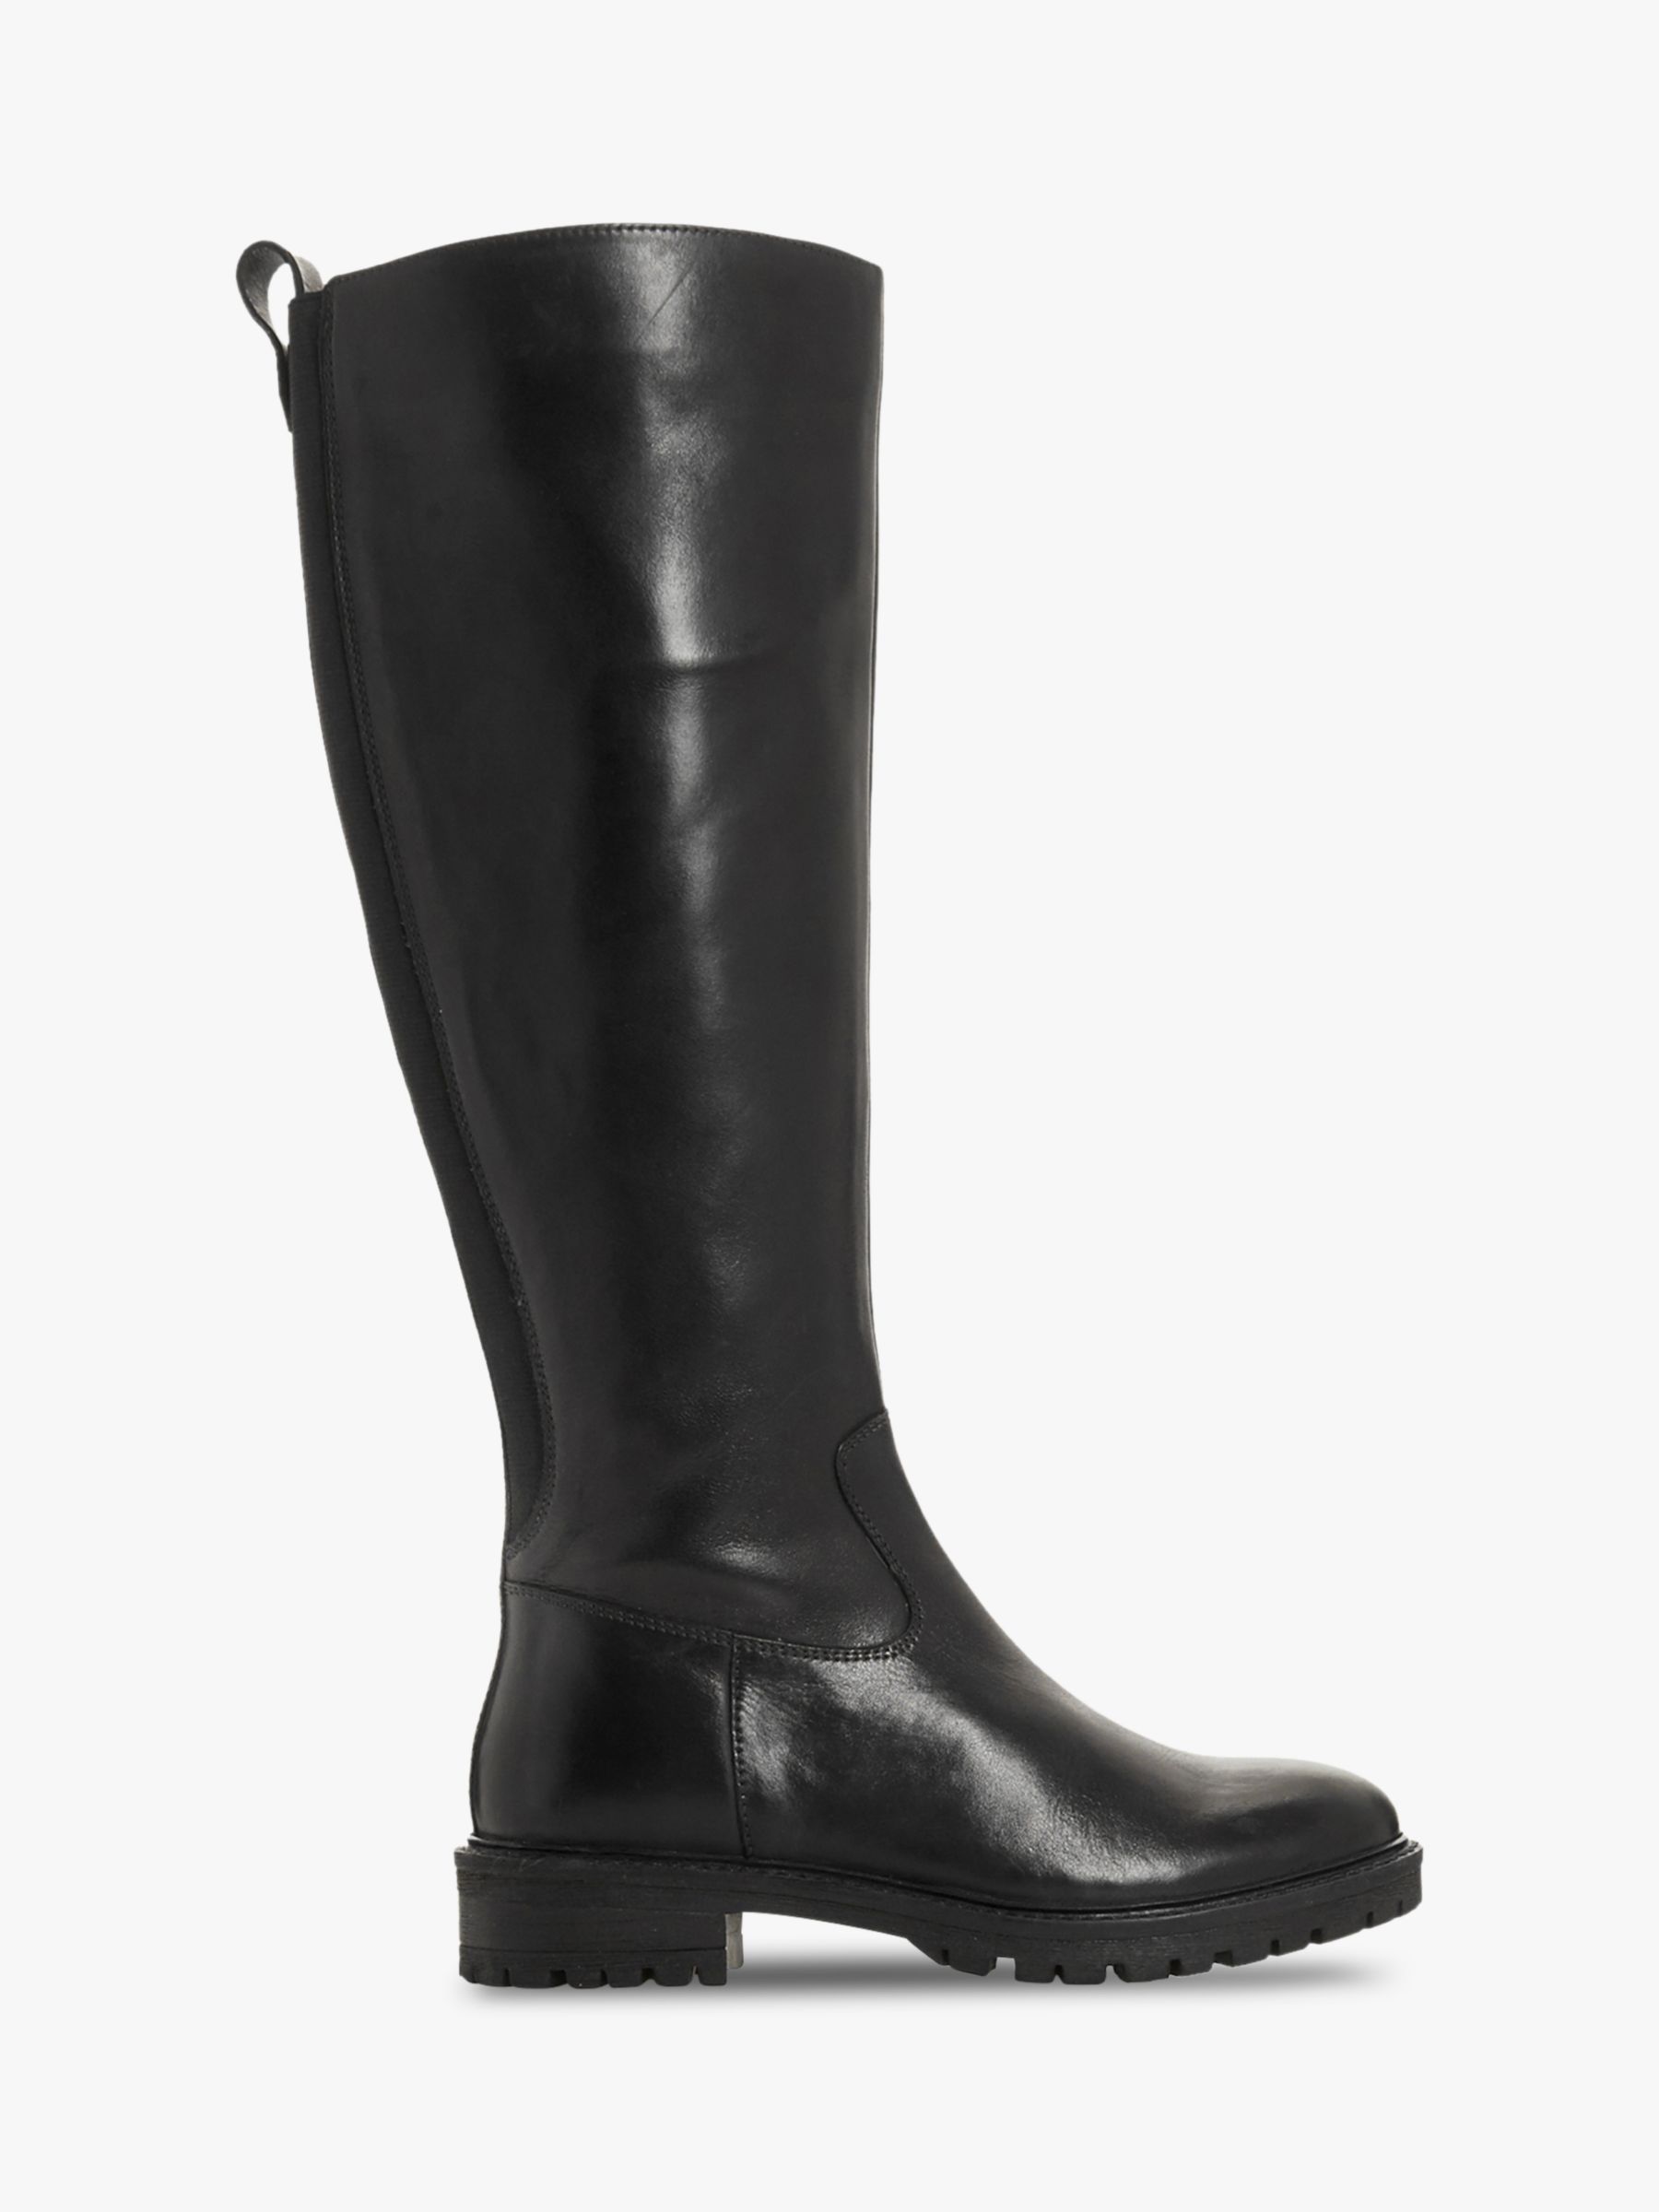 Bertie Tallow Knee High Cleated Sole Boots